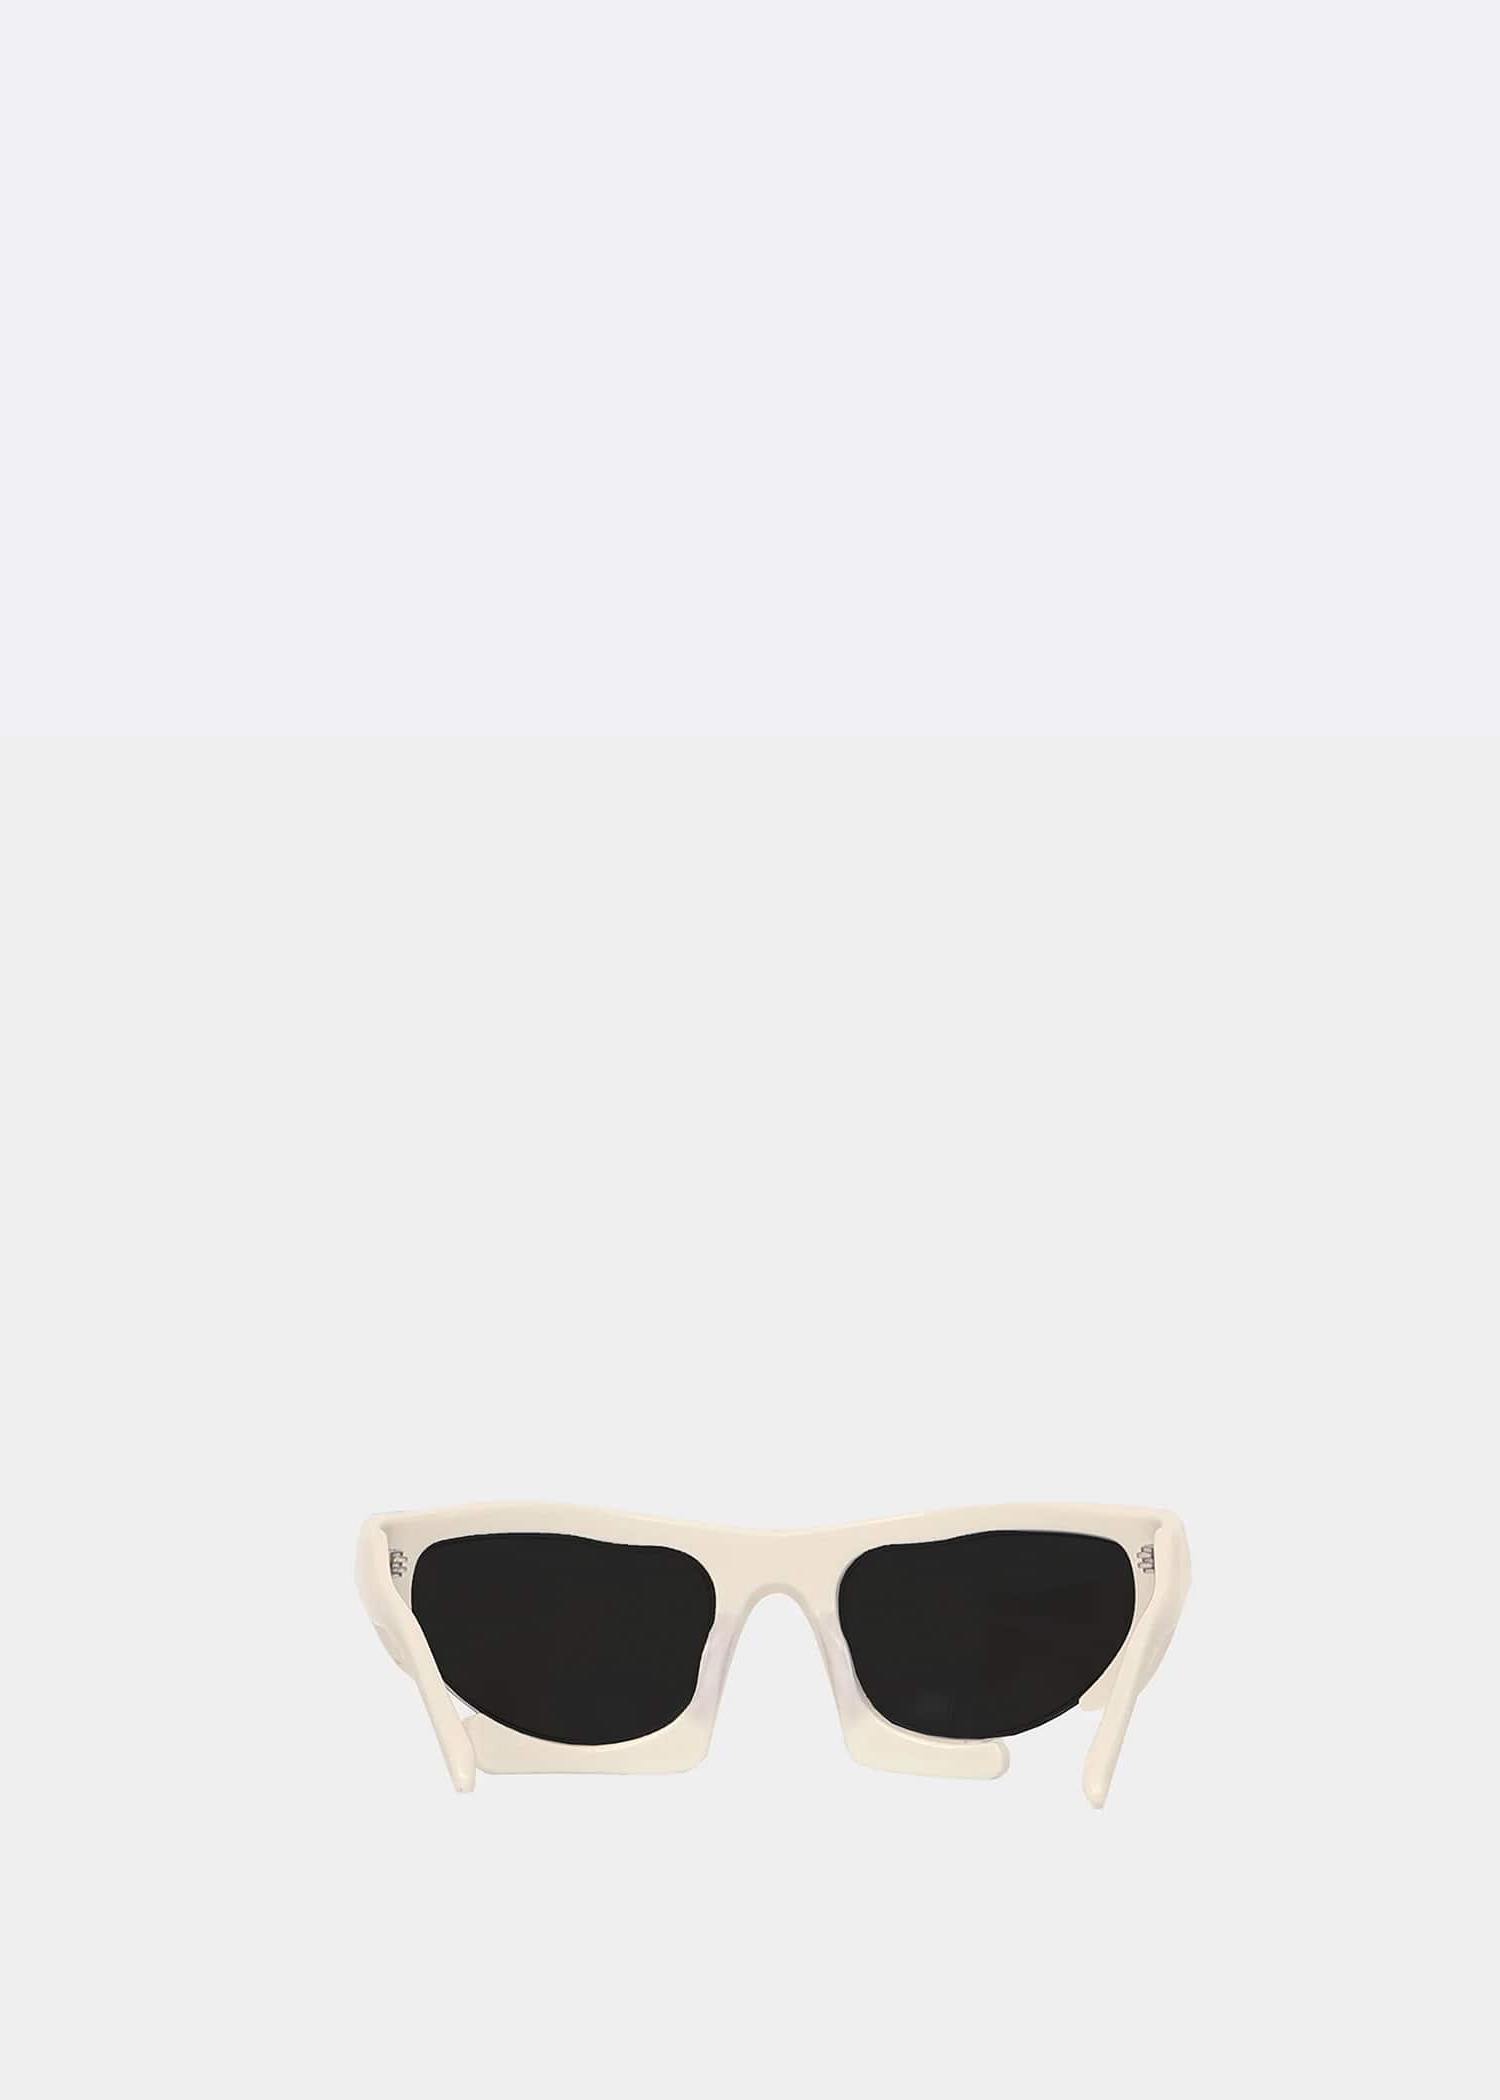 Heliot Emil Axially Sunglasses